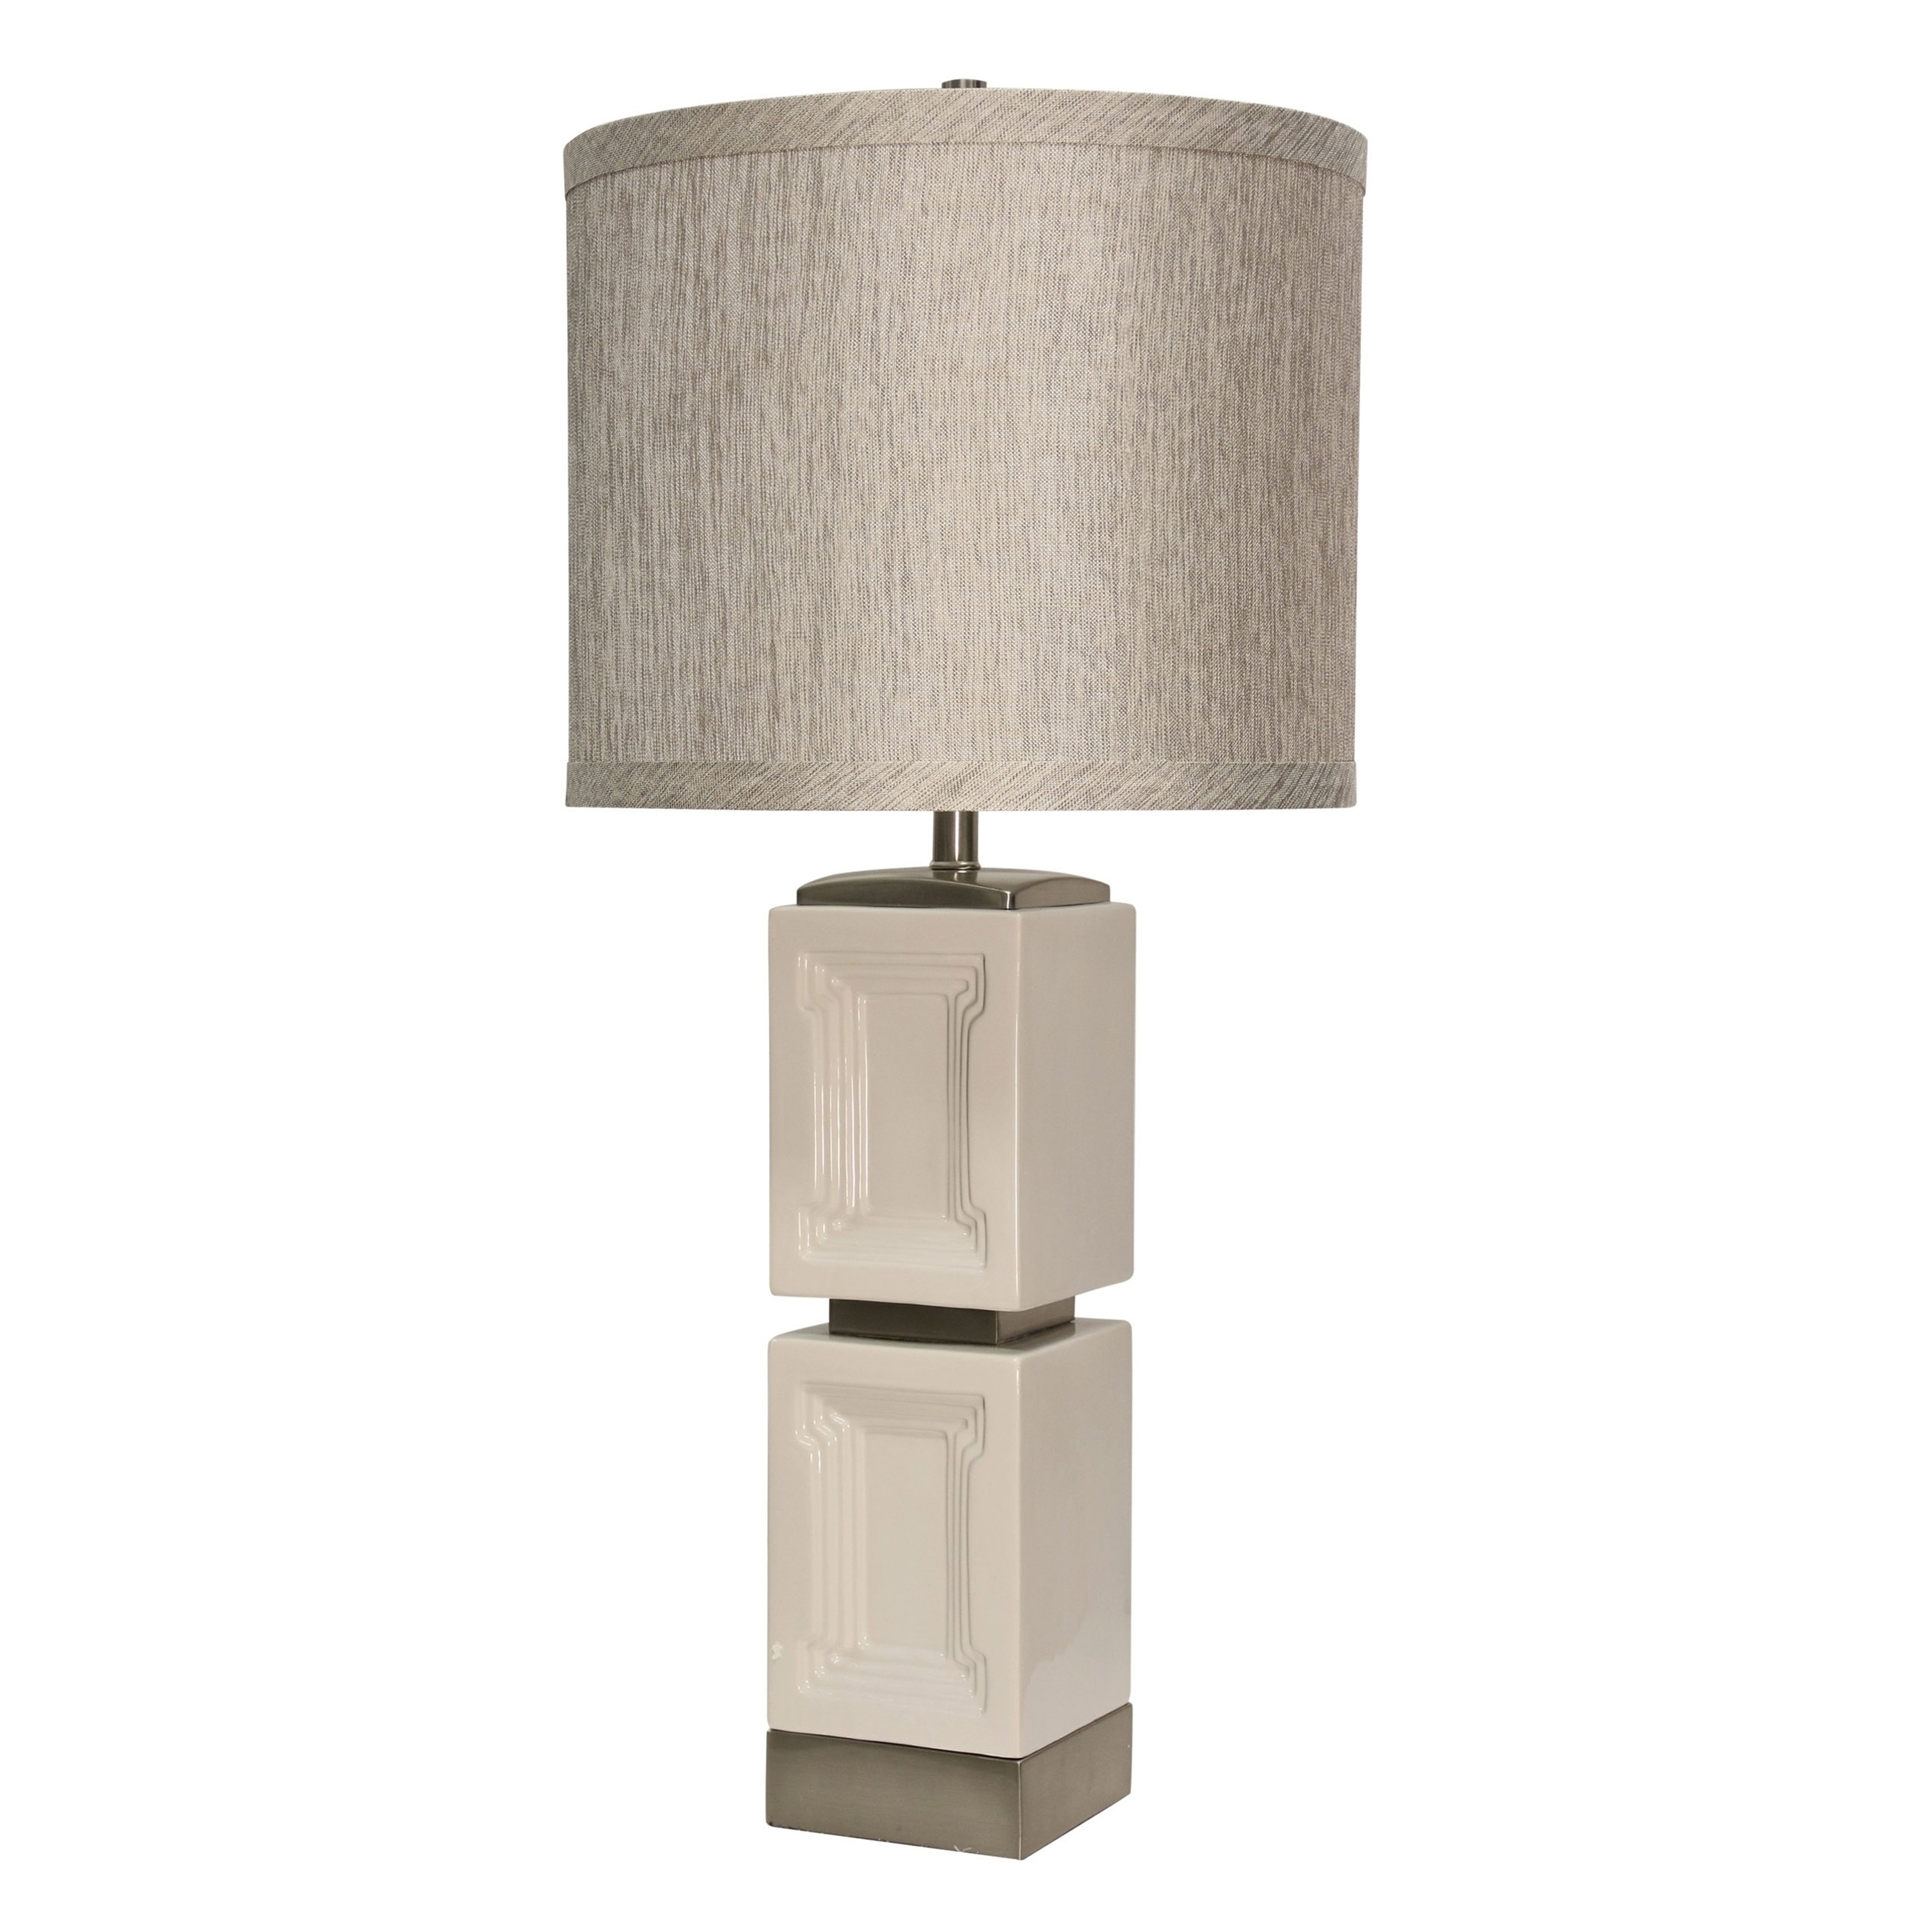 bozeman ceramic white accent table lamp grey hardback fabric shade stylecraft free shipping today target floor rugs used furniture seaside lamps small cocktail tables for spaces